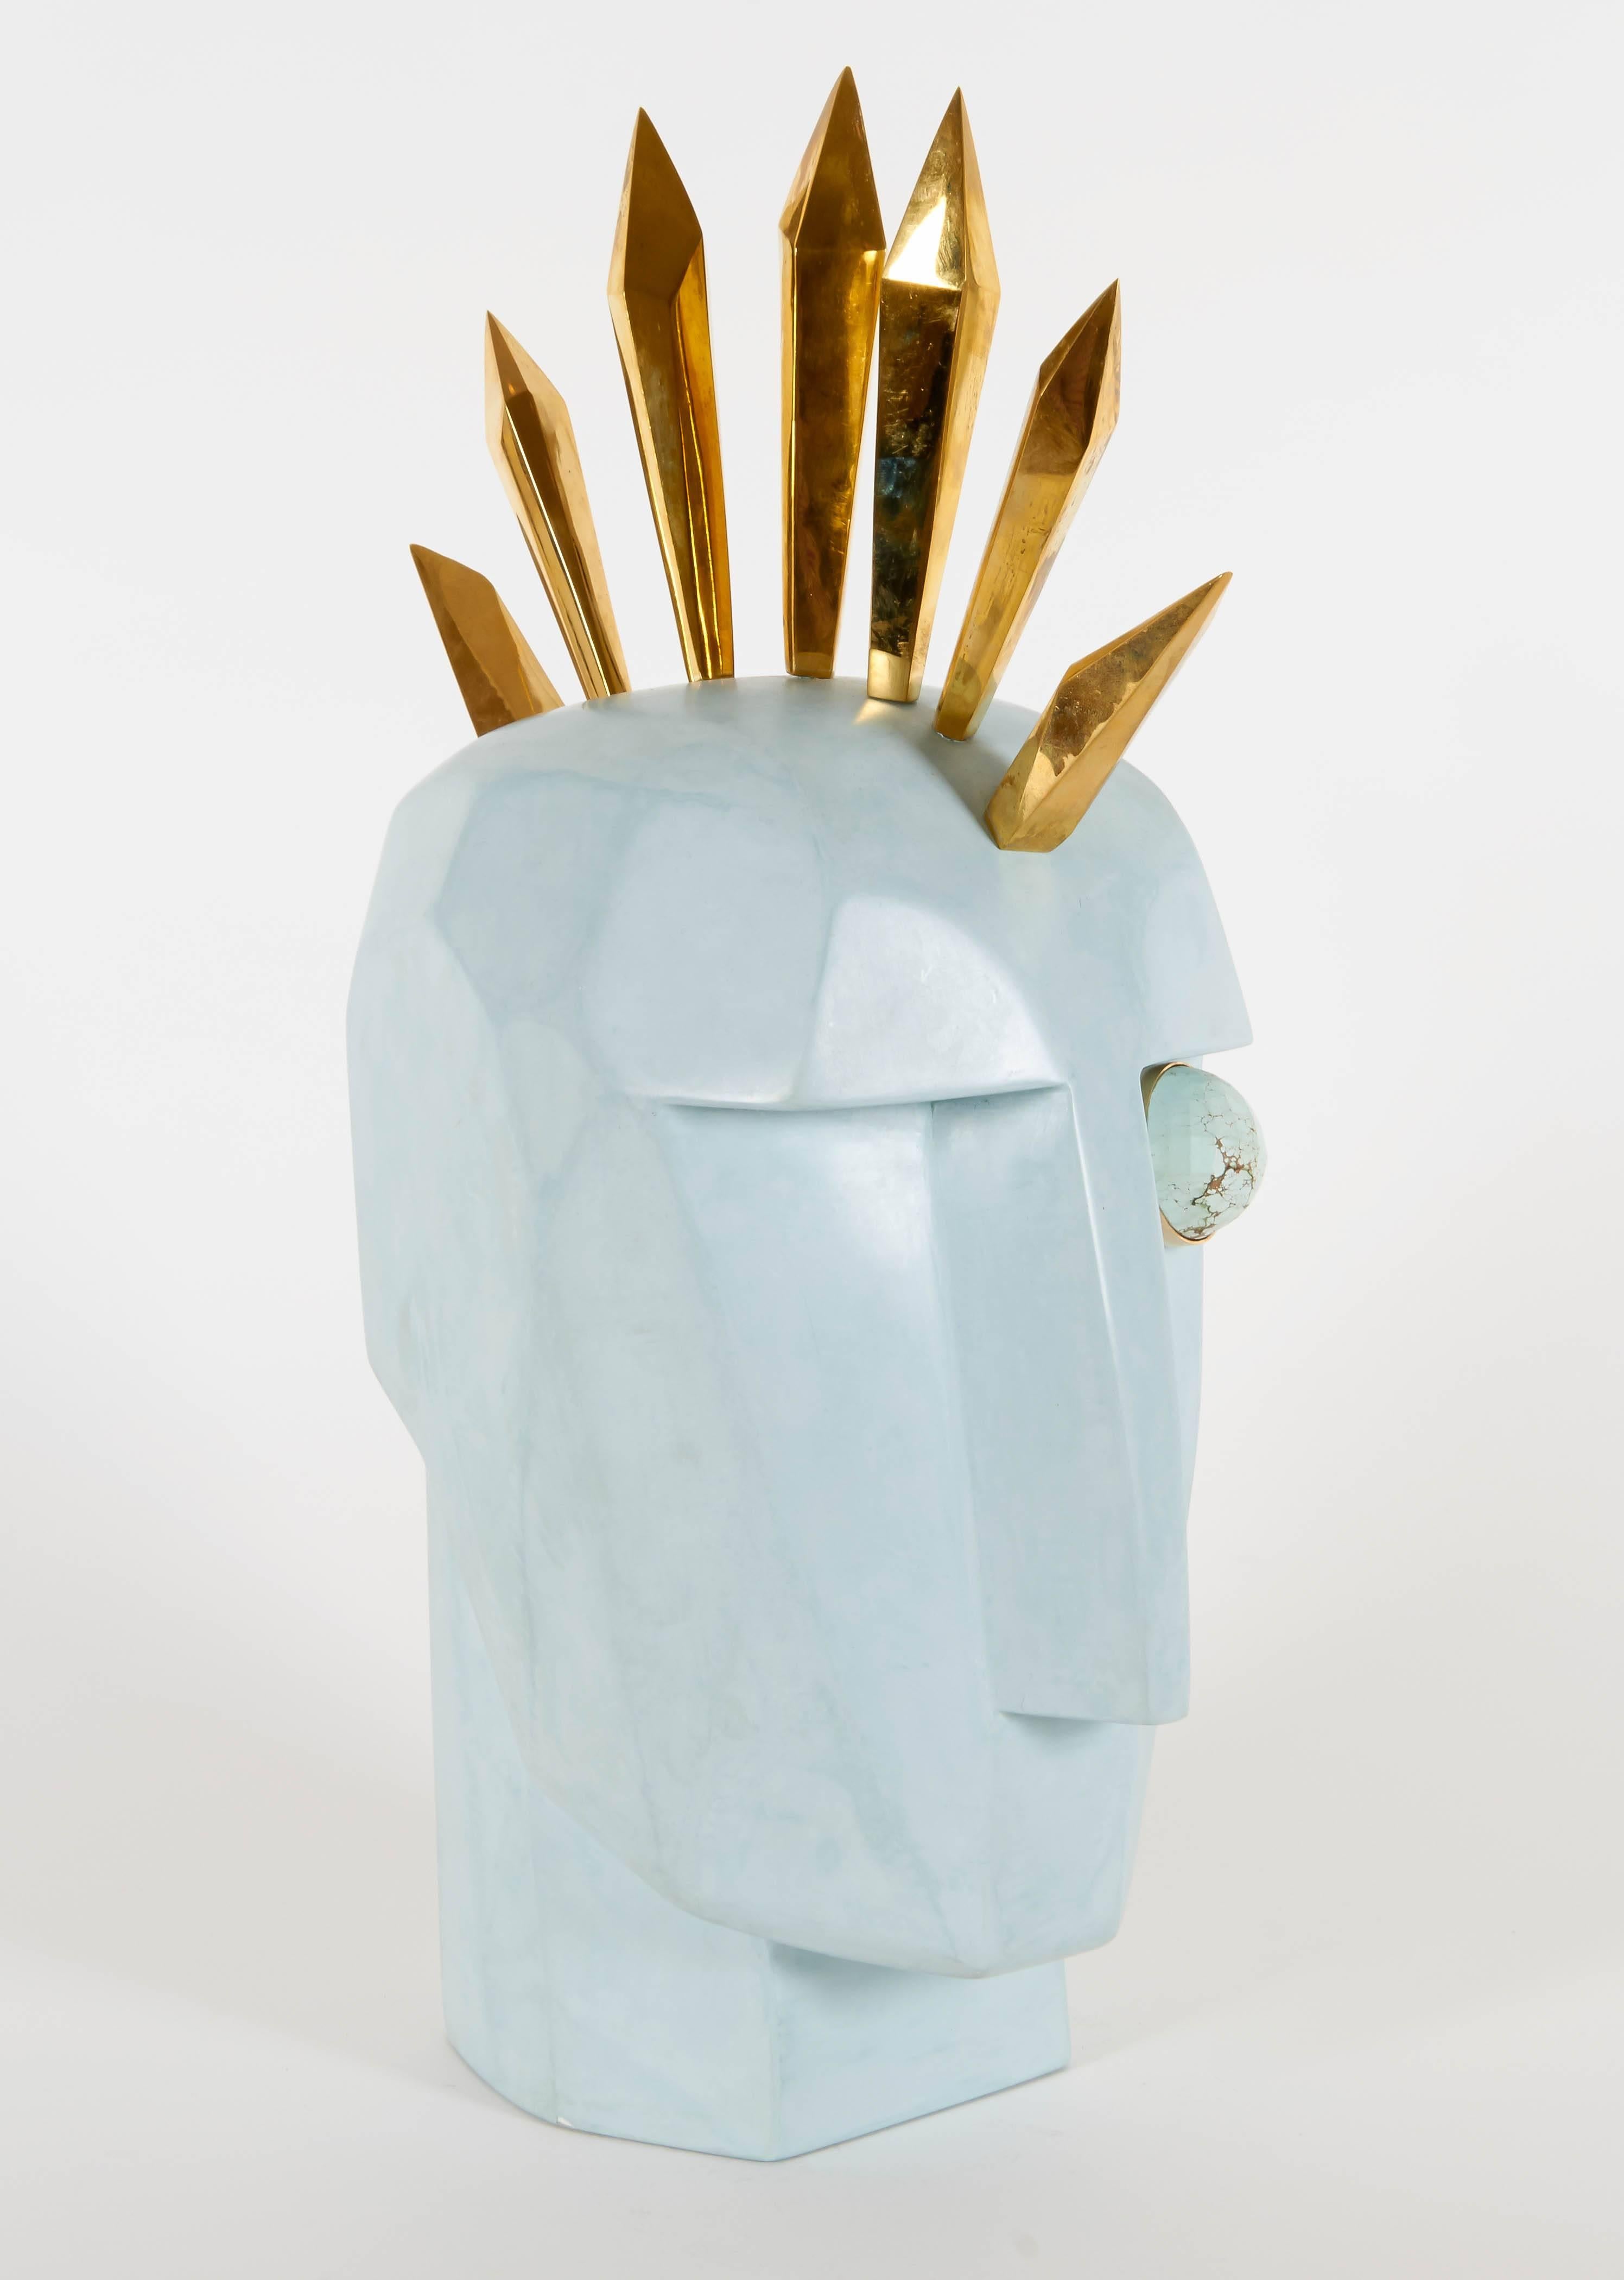 Kelly Wearstler, Faceted Spike and Eye Head Trip Sculpture In Excellent Condition For Sale In New York, NY